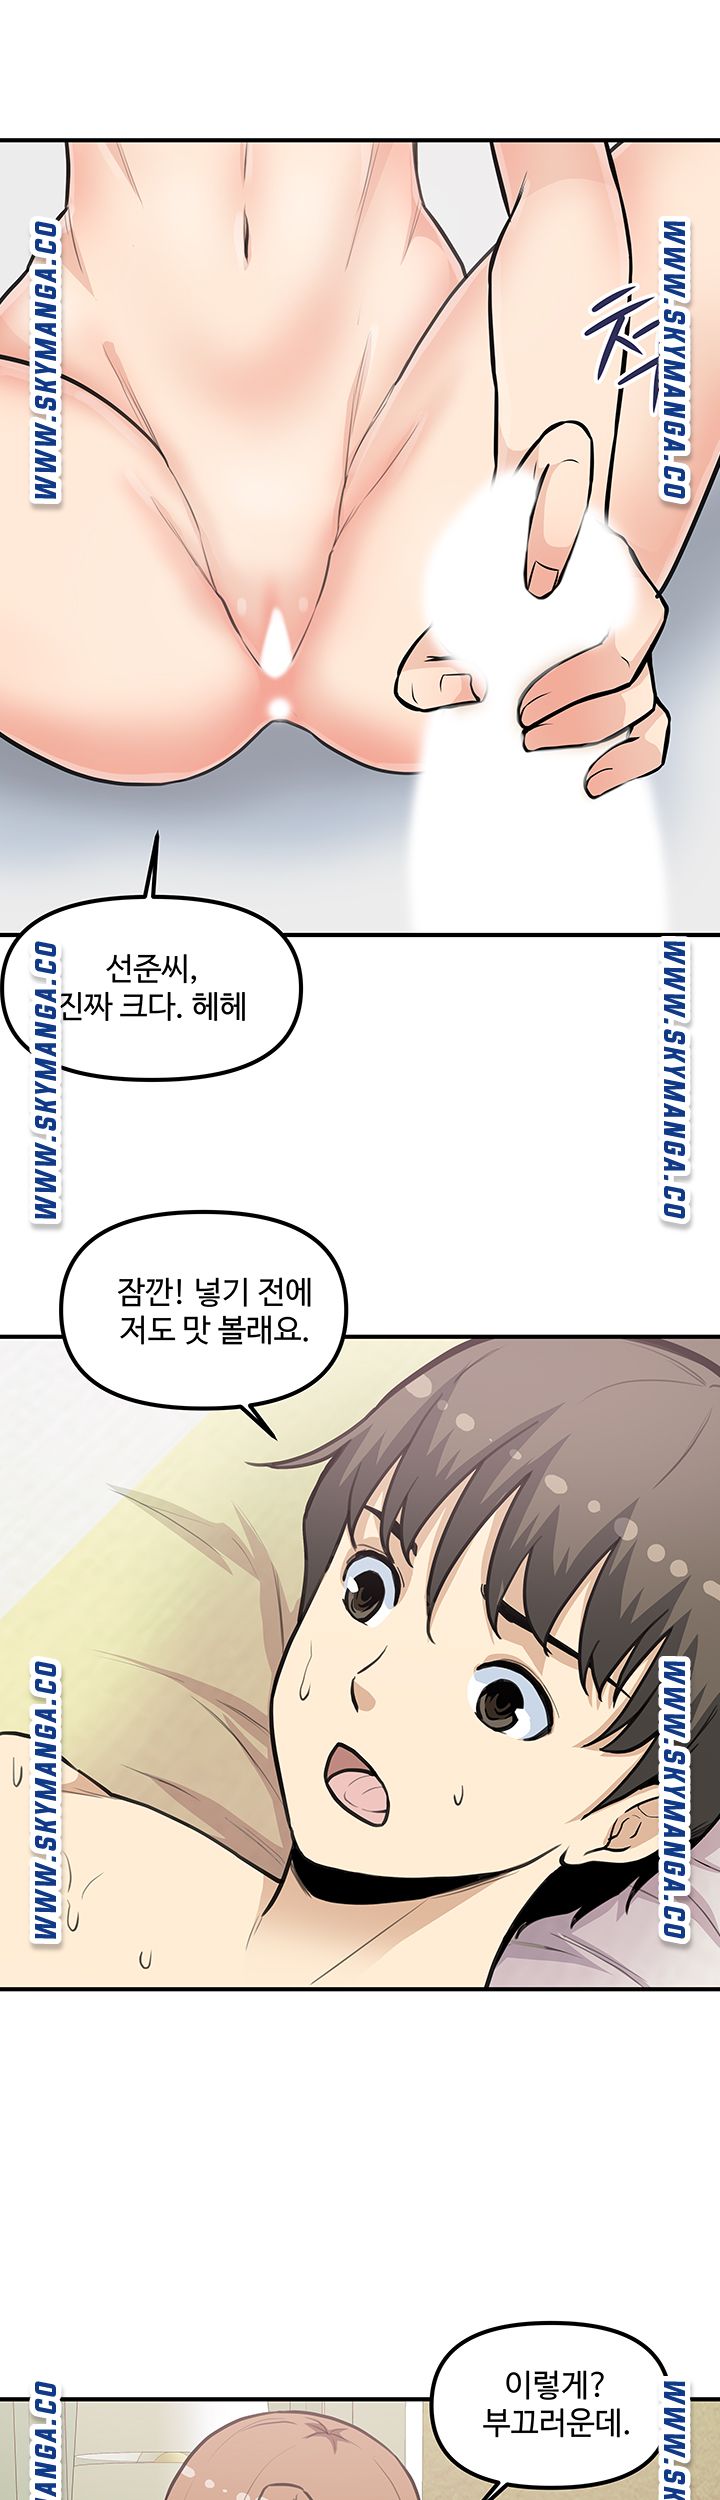 Office Bible Raw - Chapter 23 Page 16